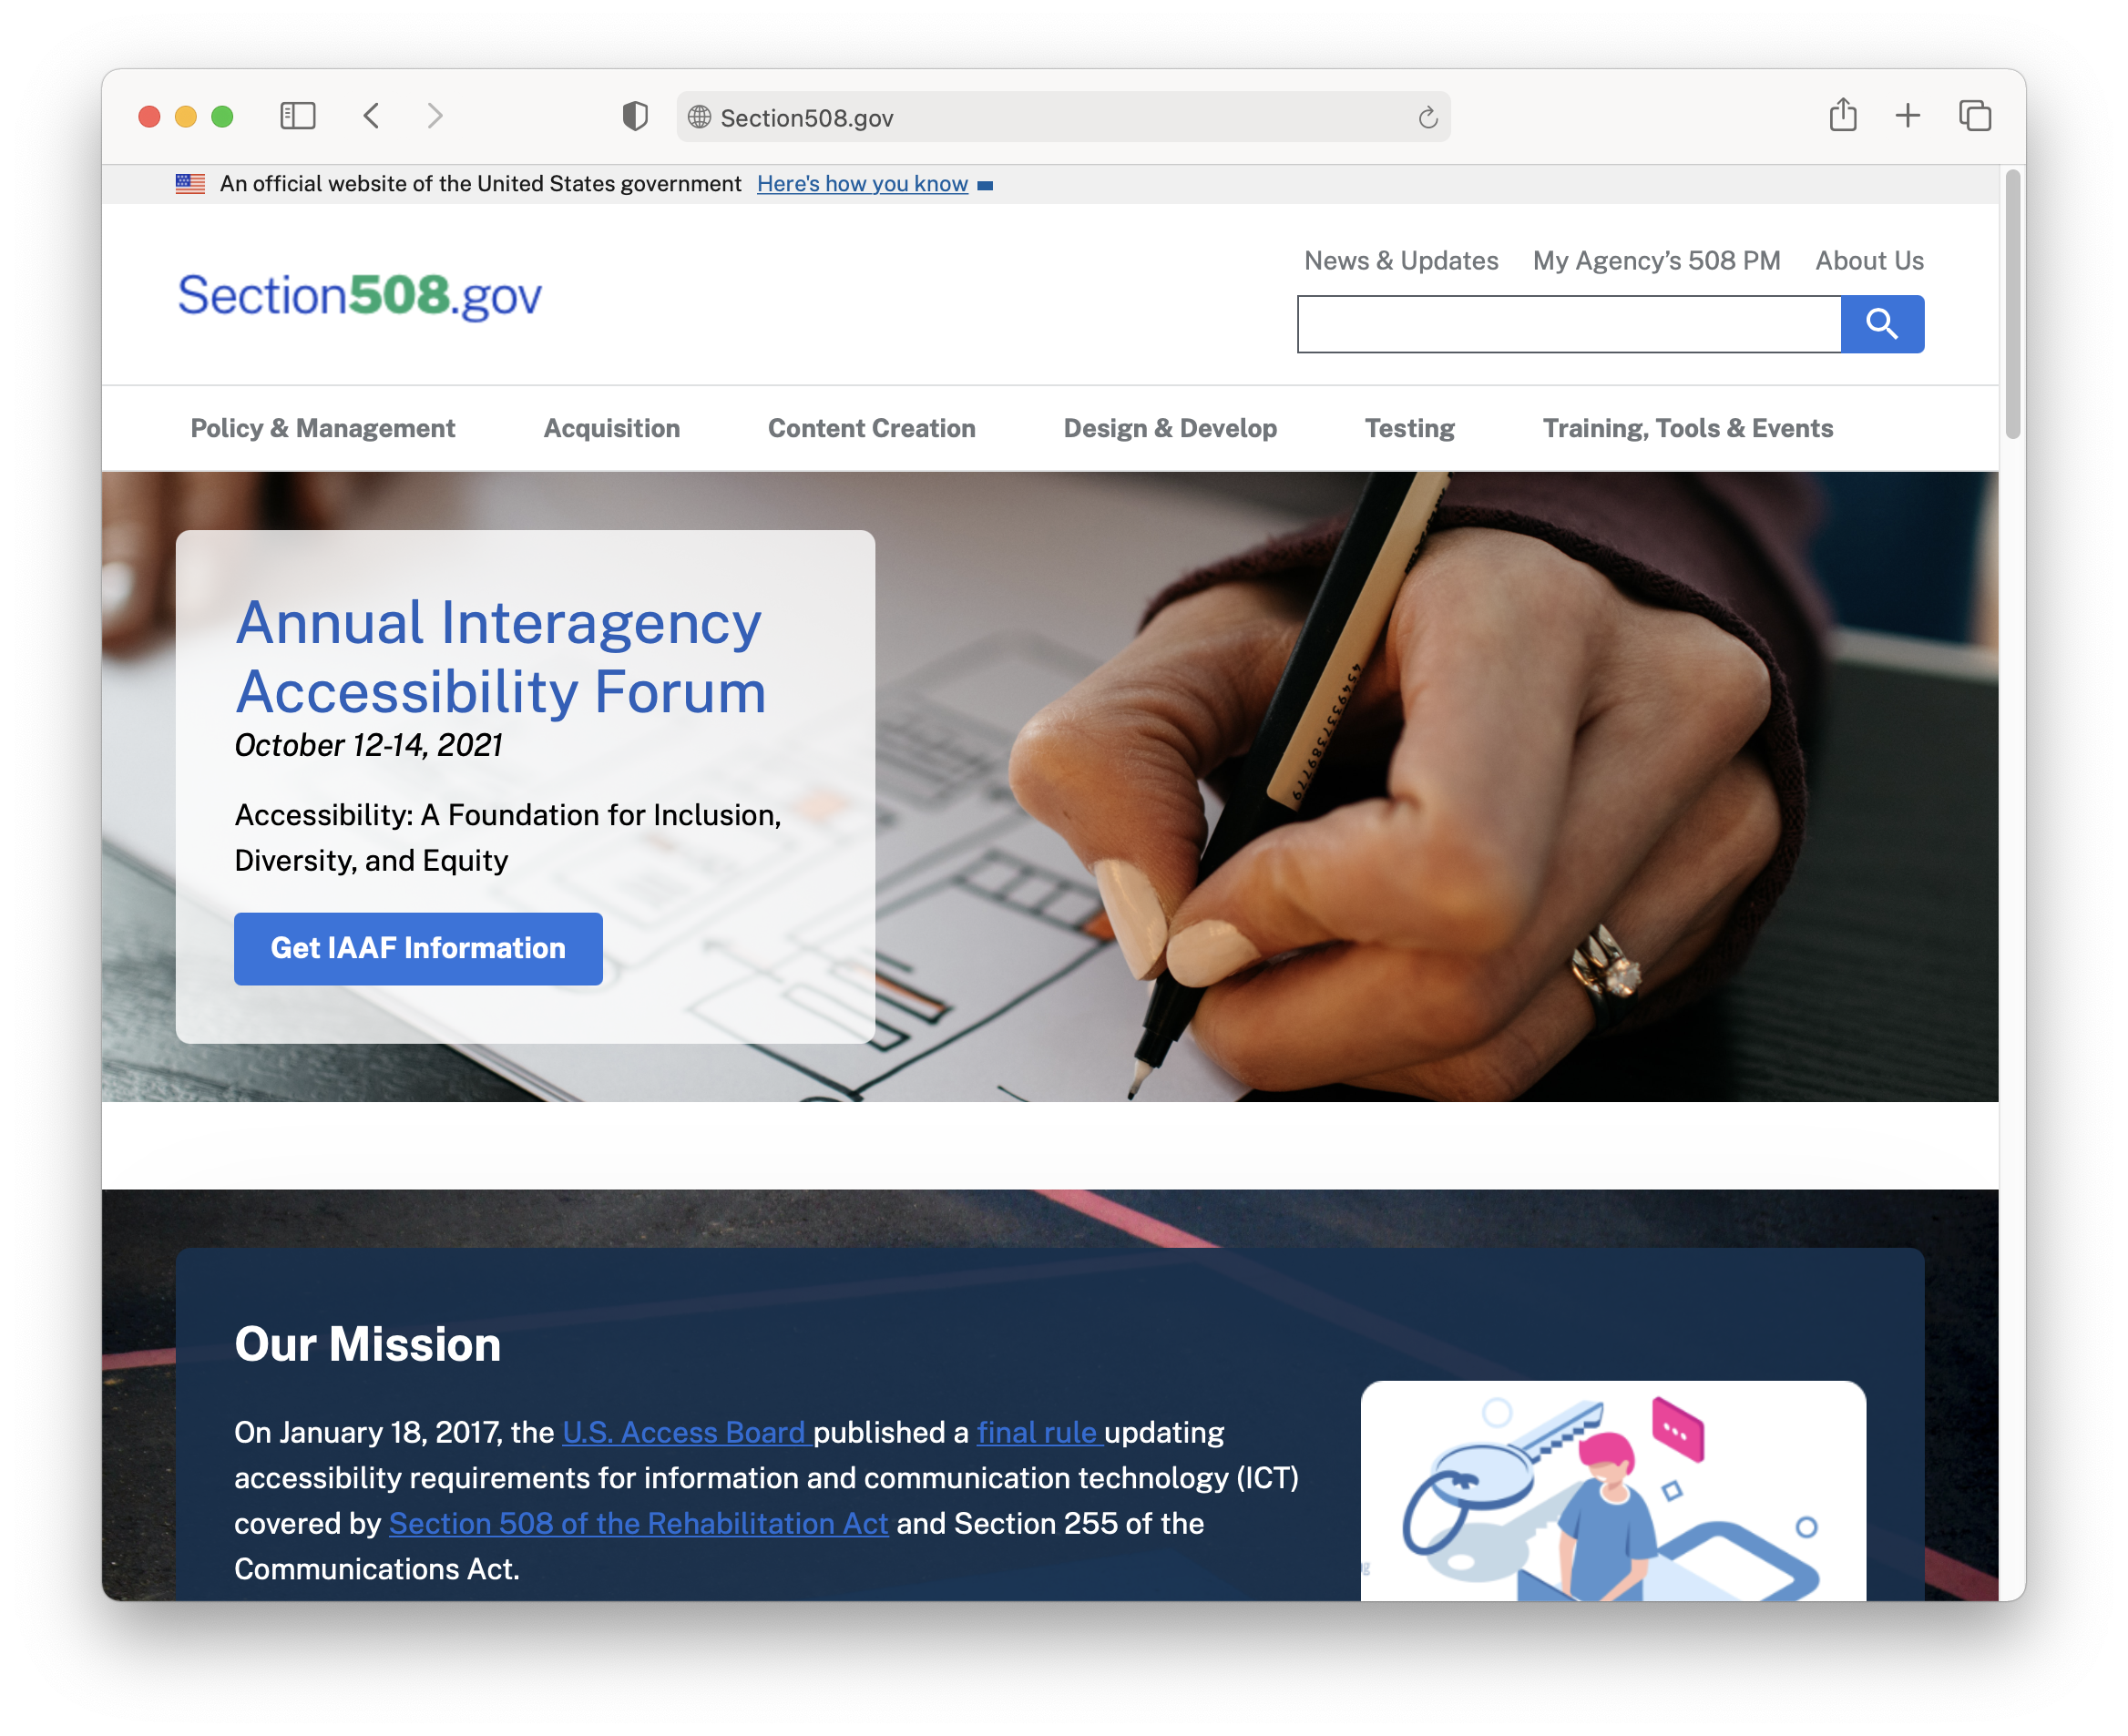 Small, abstract view of the new Section508.gov homepage with a promotion for the Annual Interagency Accessibility Forum.